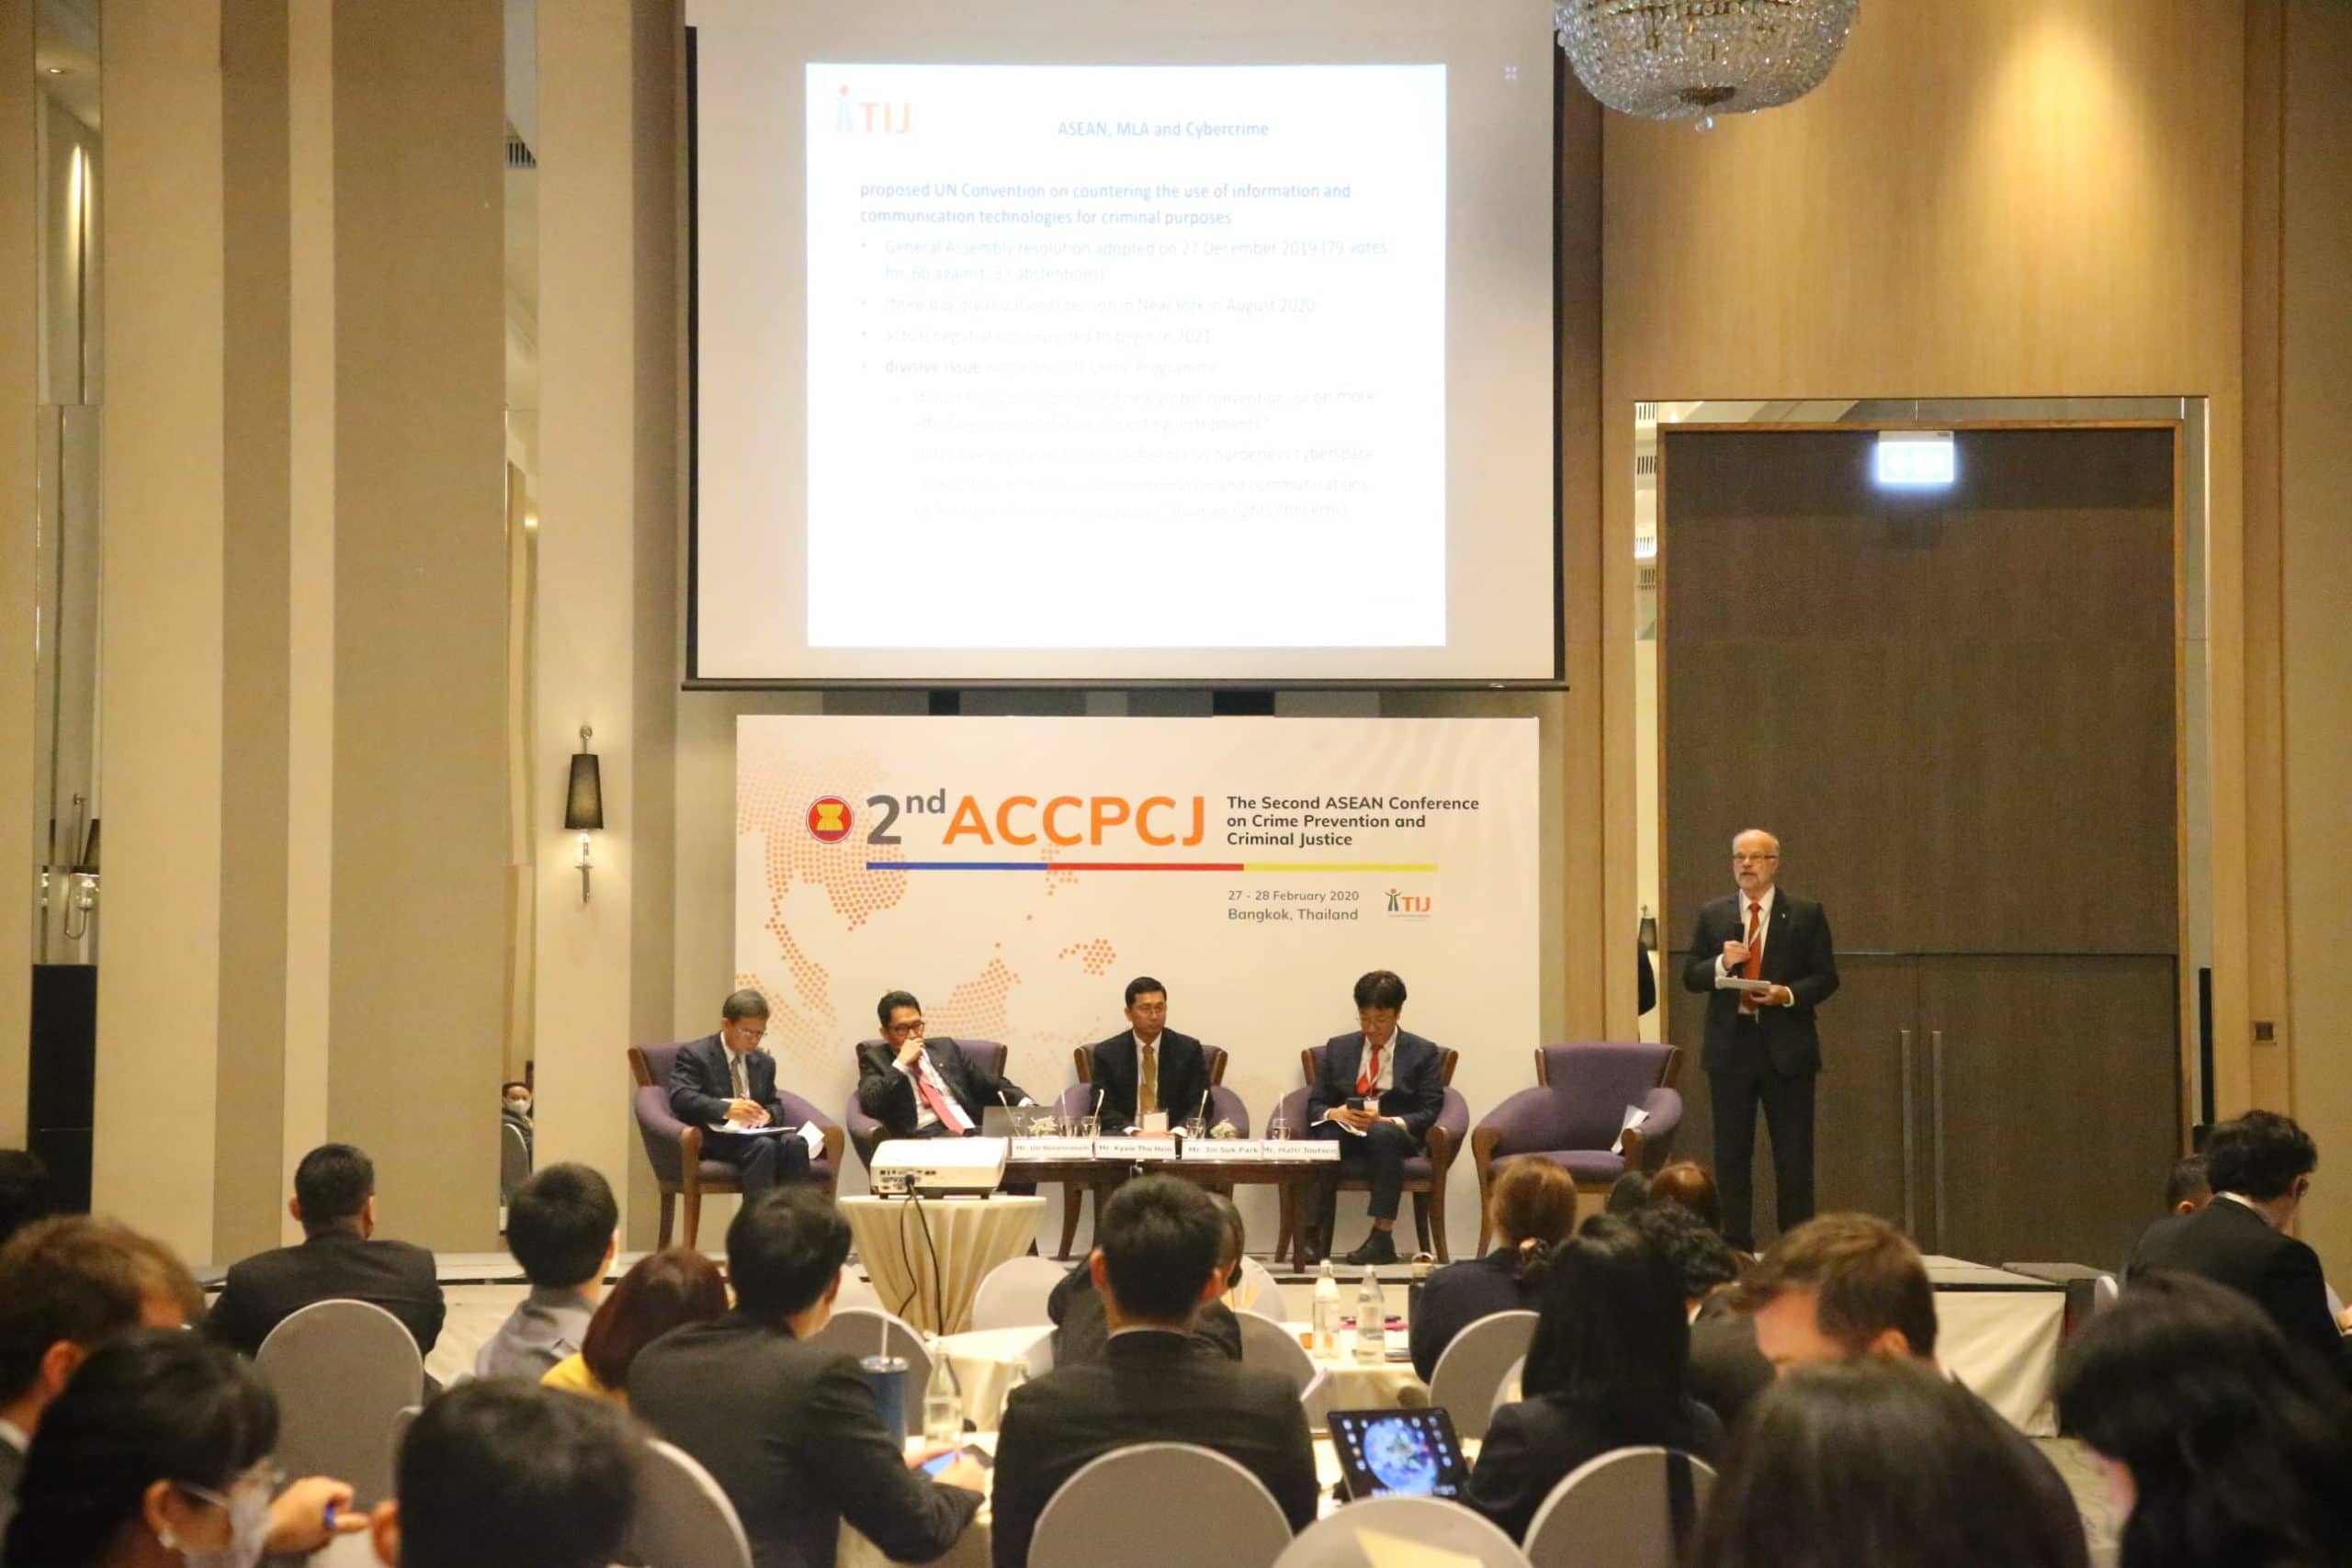 2nd ACCPCJ The Second ASEAN Conference on Crime Prevention and Criminal Justice TIJ